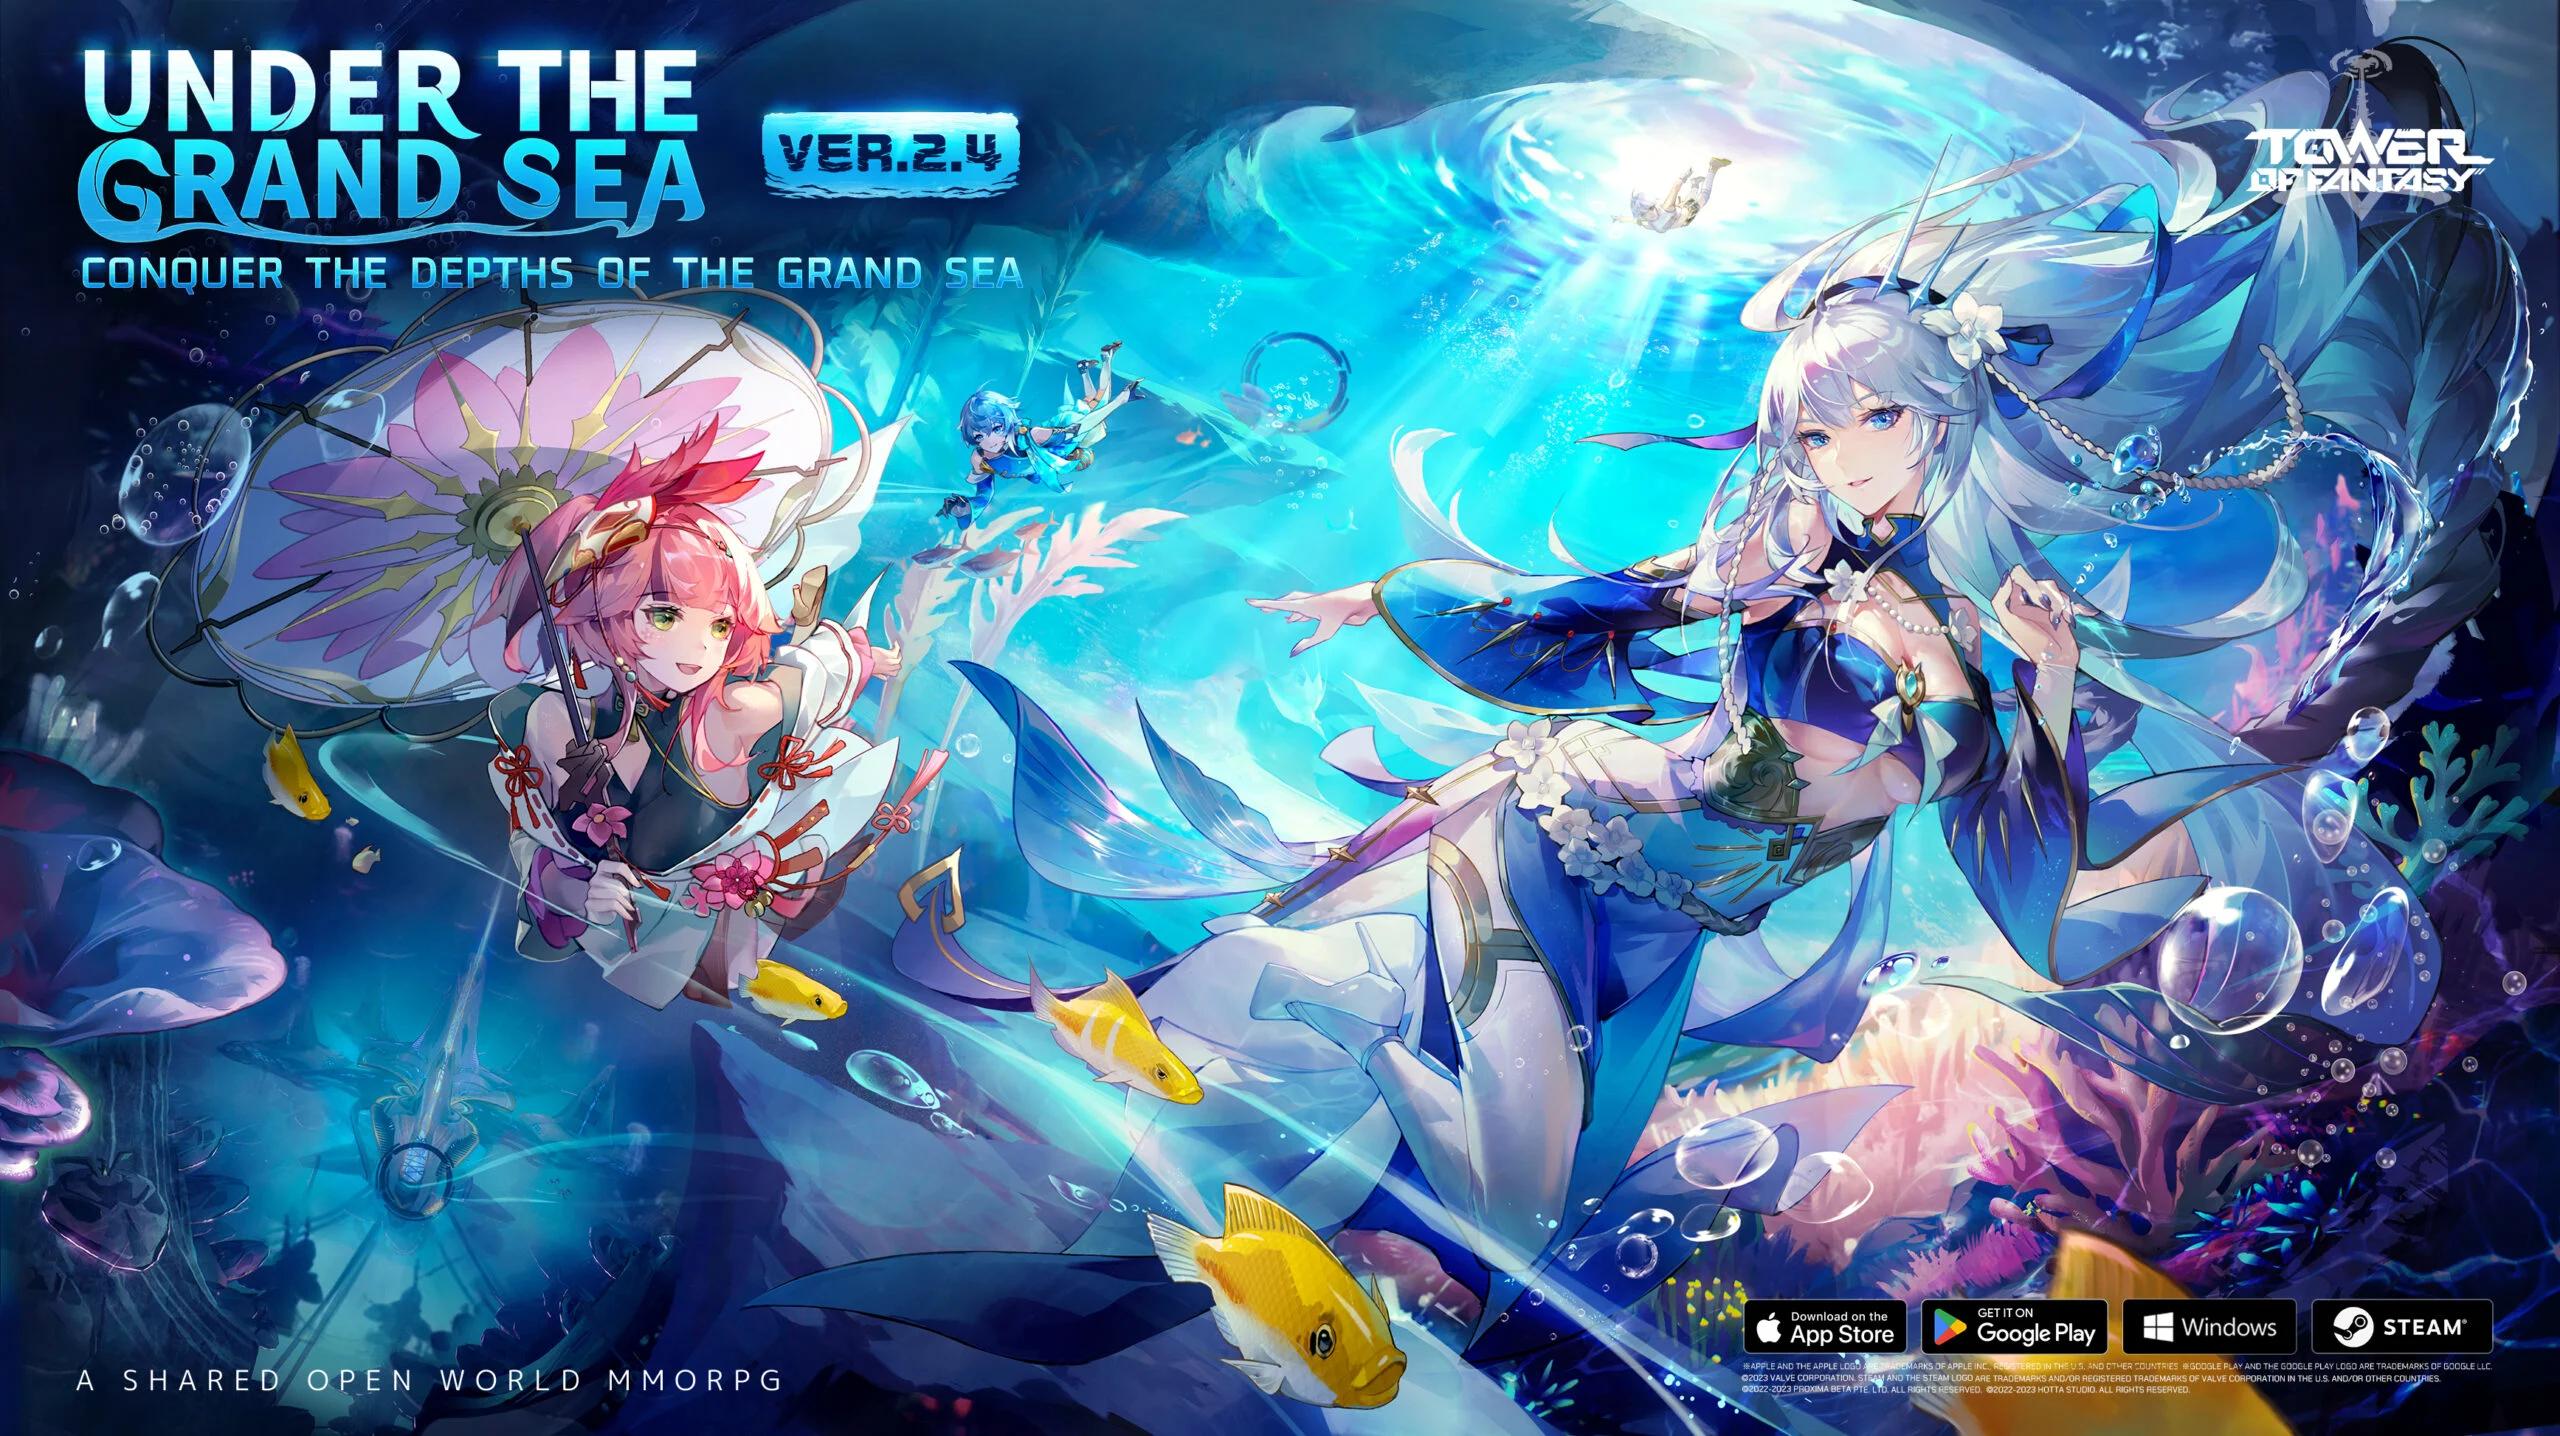 Tower of Fantasy Version 2.4: Under the Grand Sea Launches Soon 3